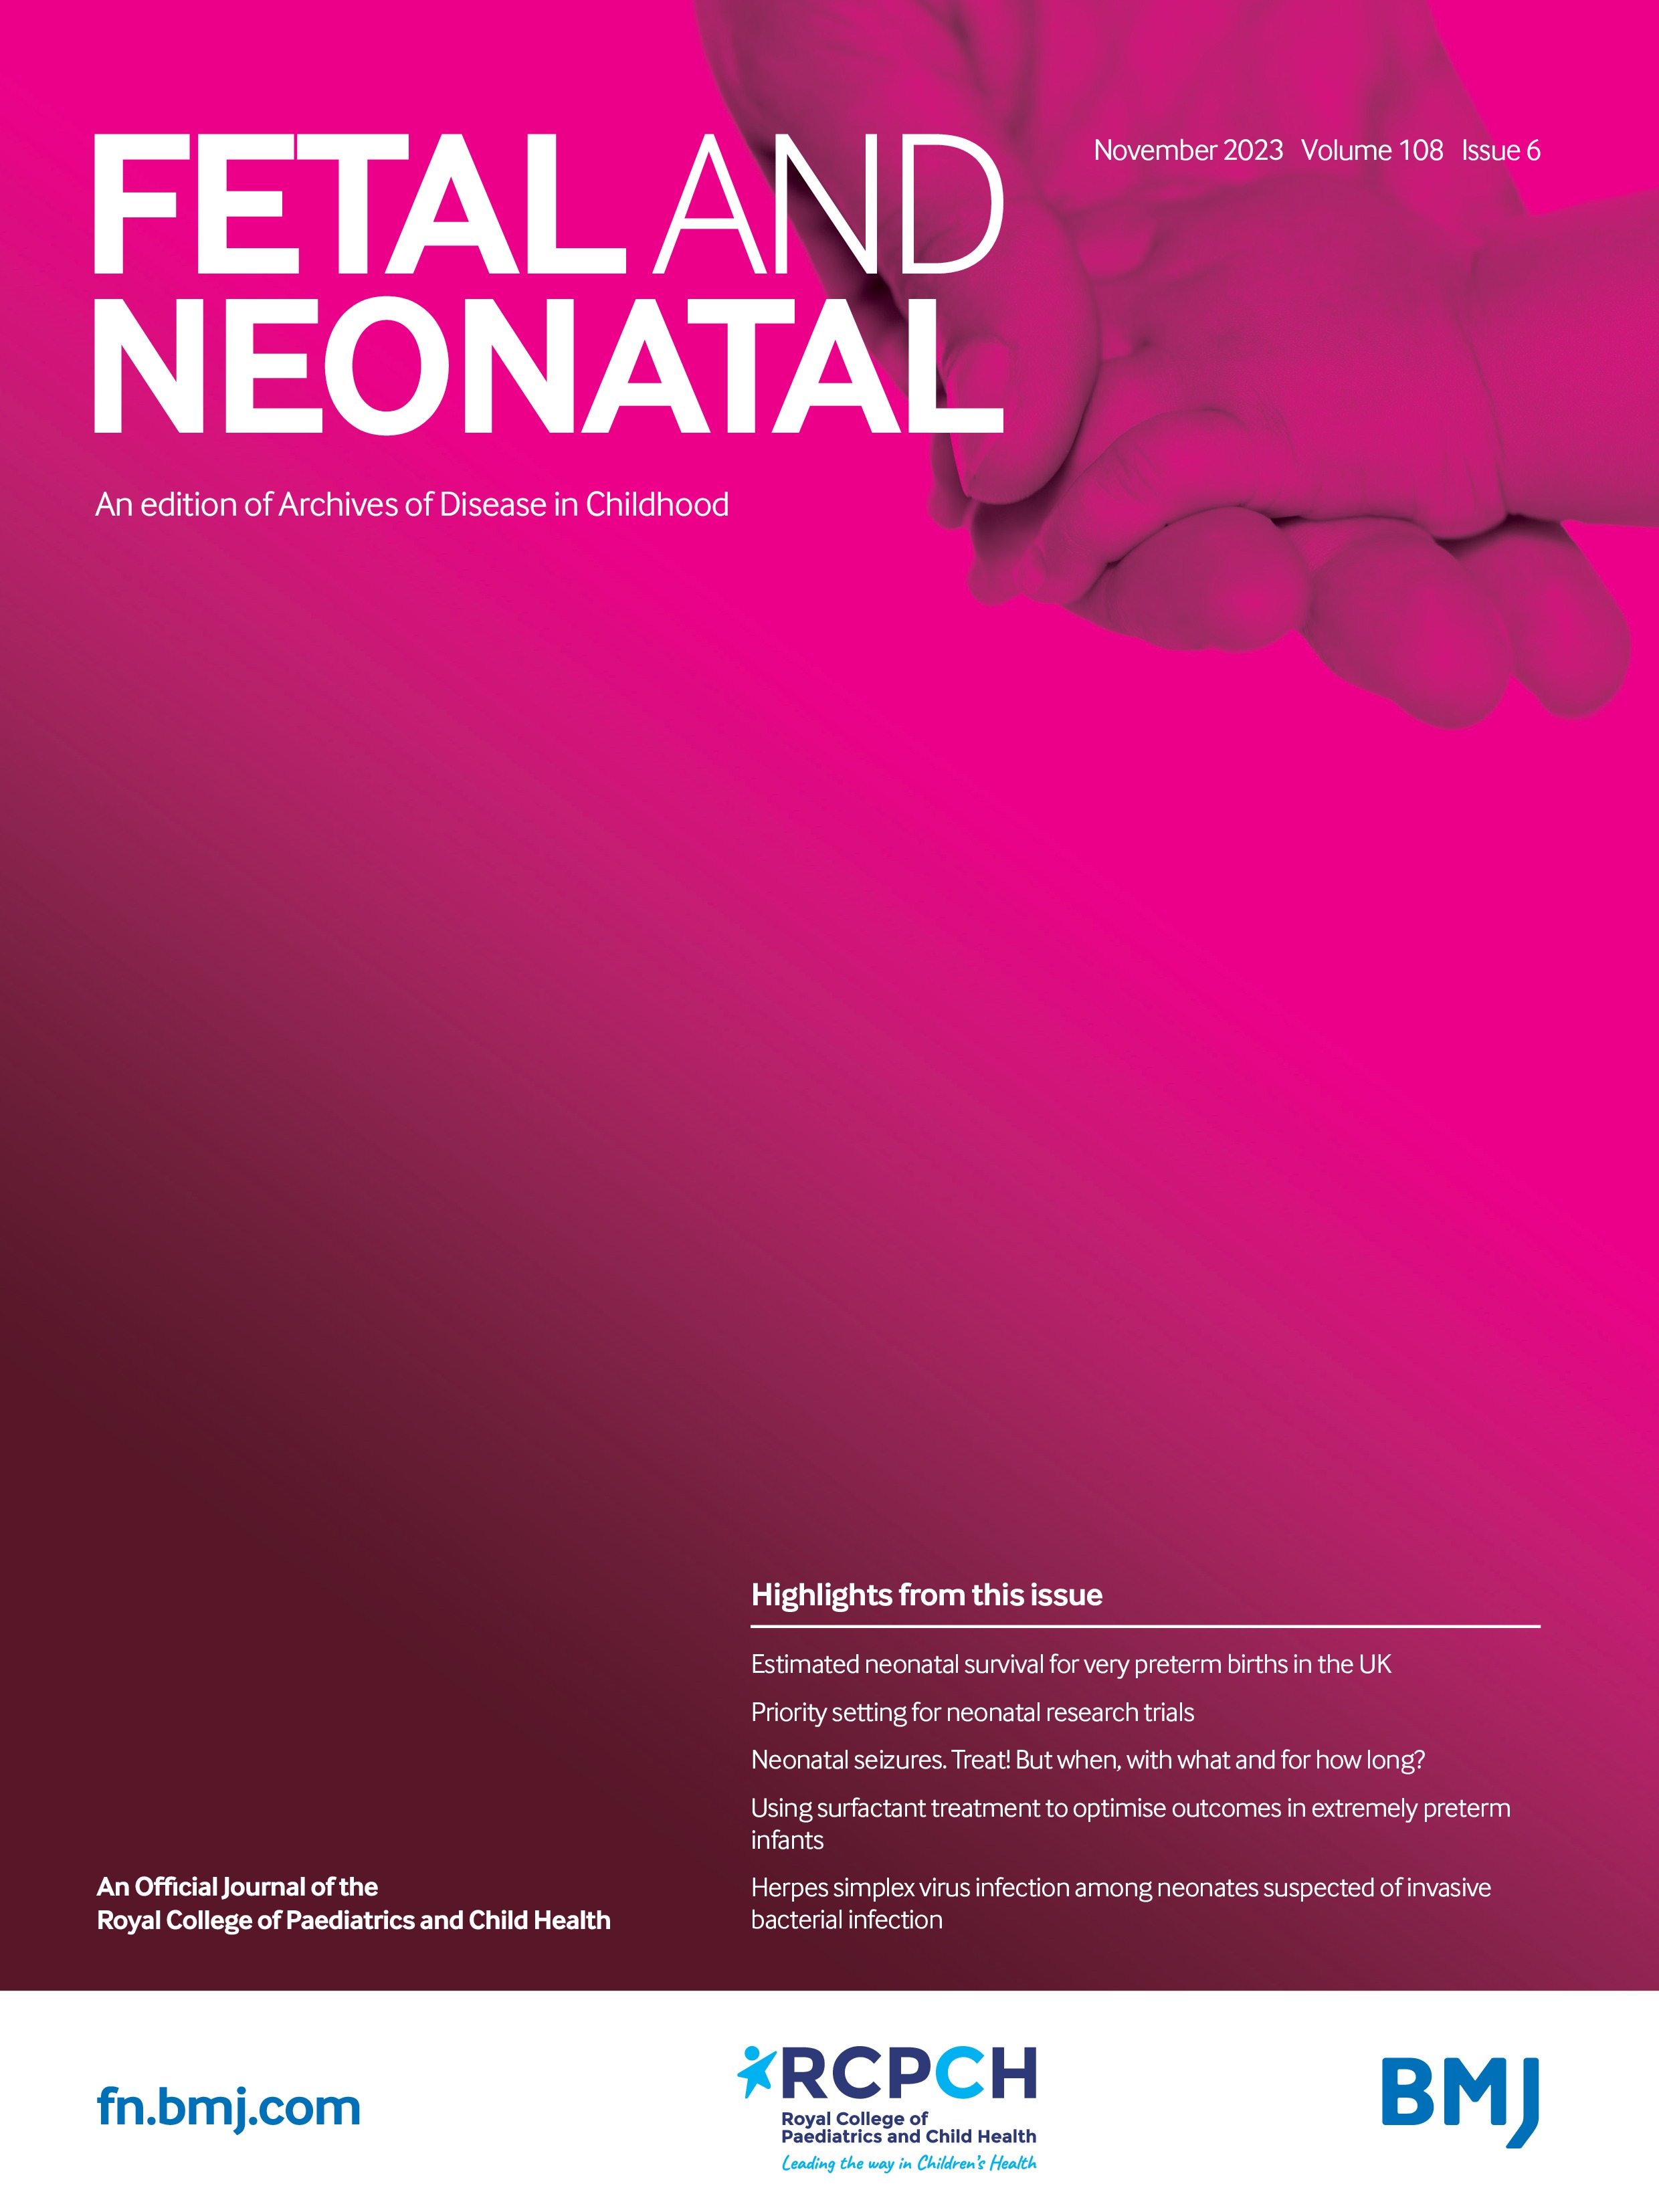 Estimated neonatal survival of very preterm births across the care pathway: a UK cohort 2016-2020